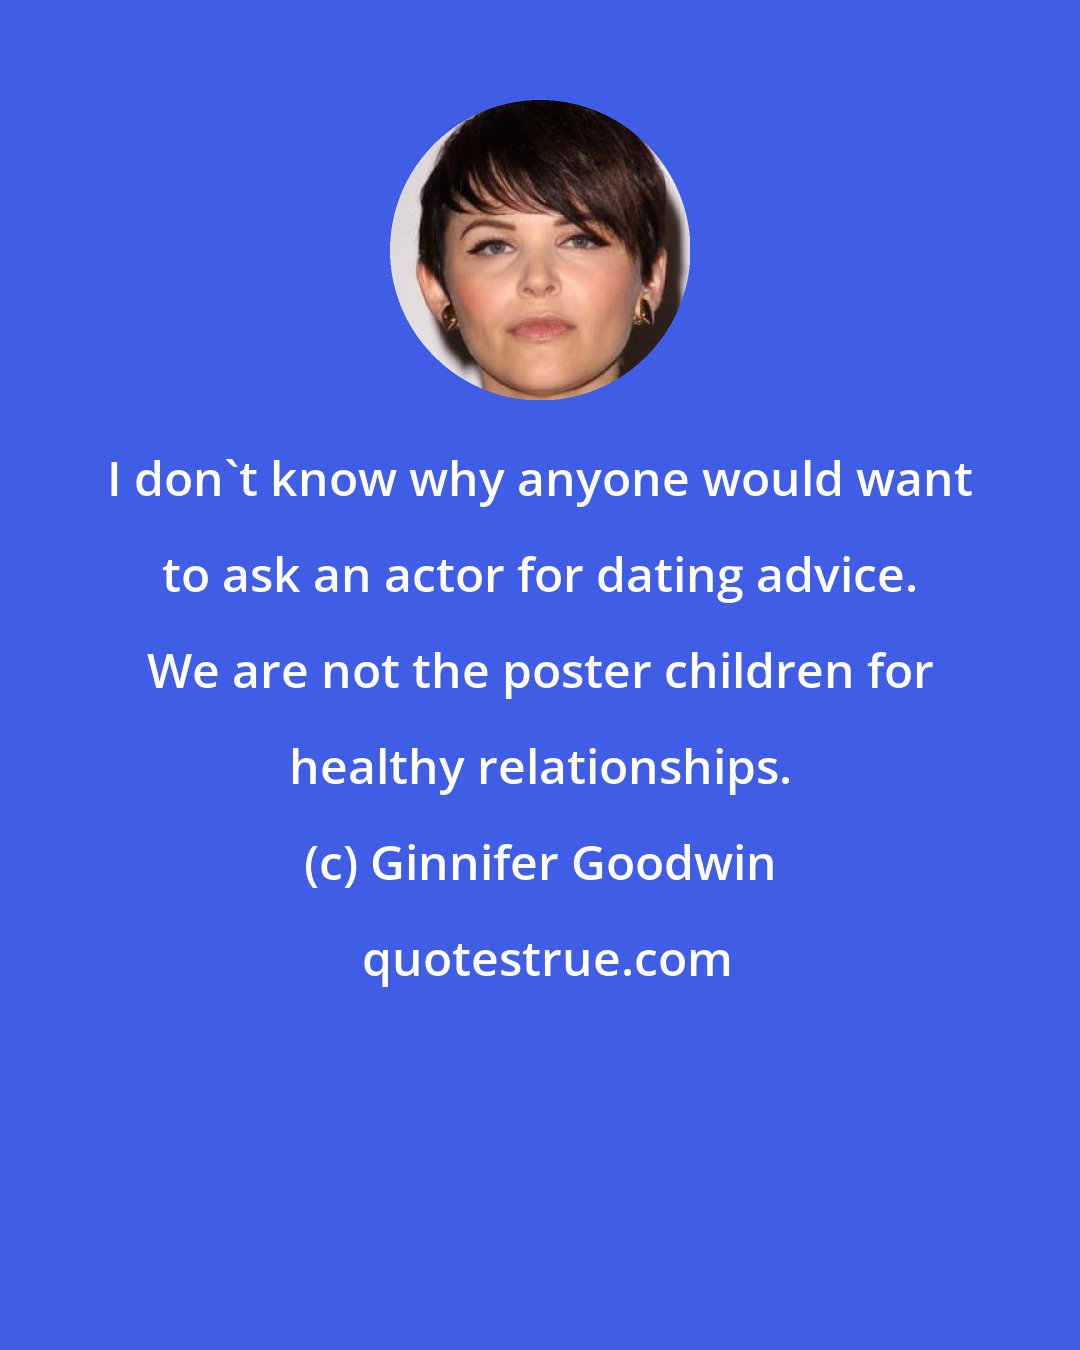 Ginnifer Goodwin: I don't know why anyone would want to ask an actor for dating advice. We are not the poster children for healthy relationships.